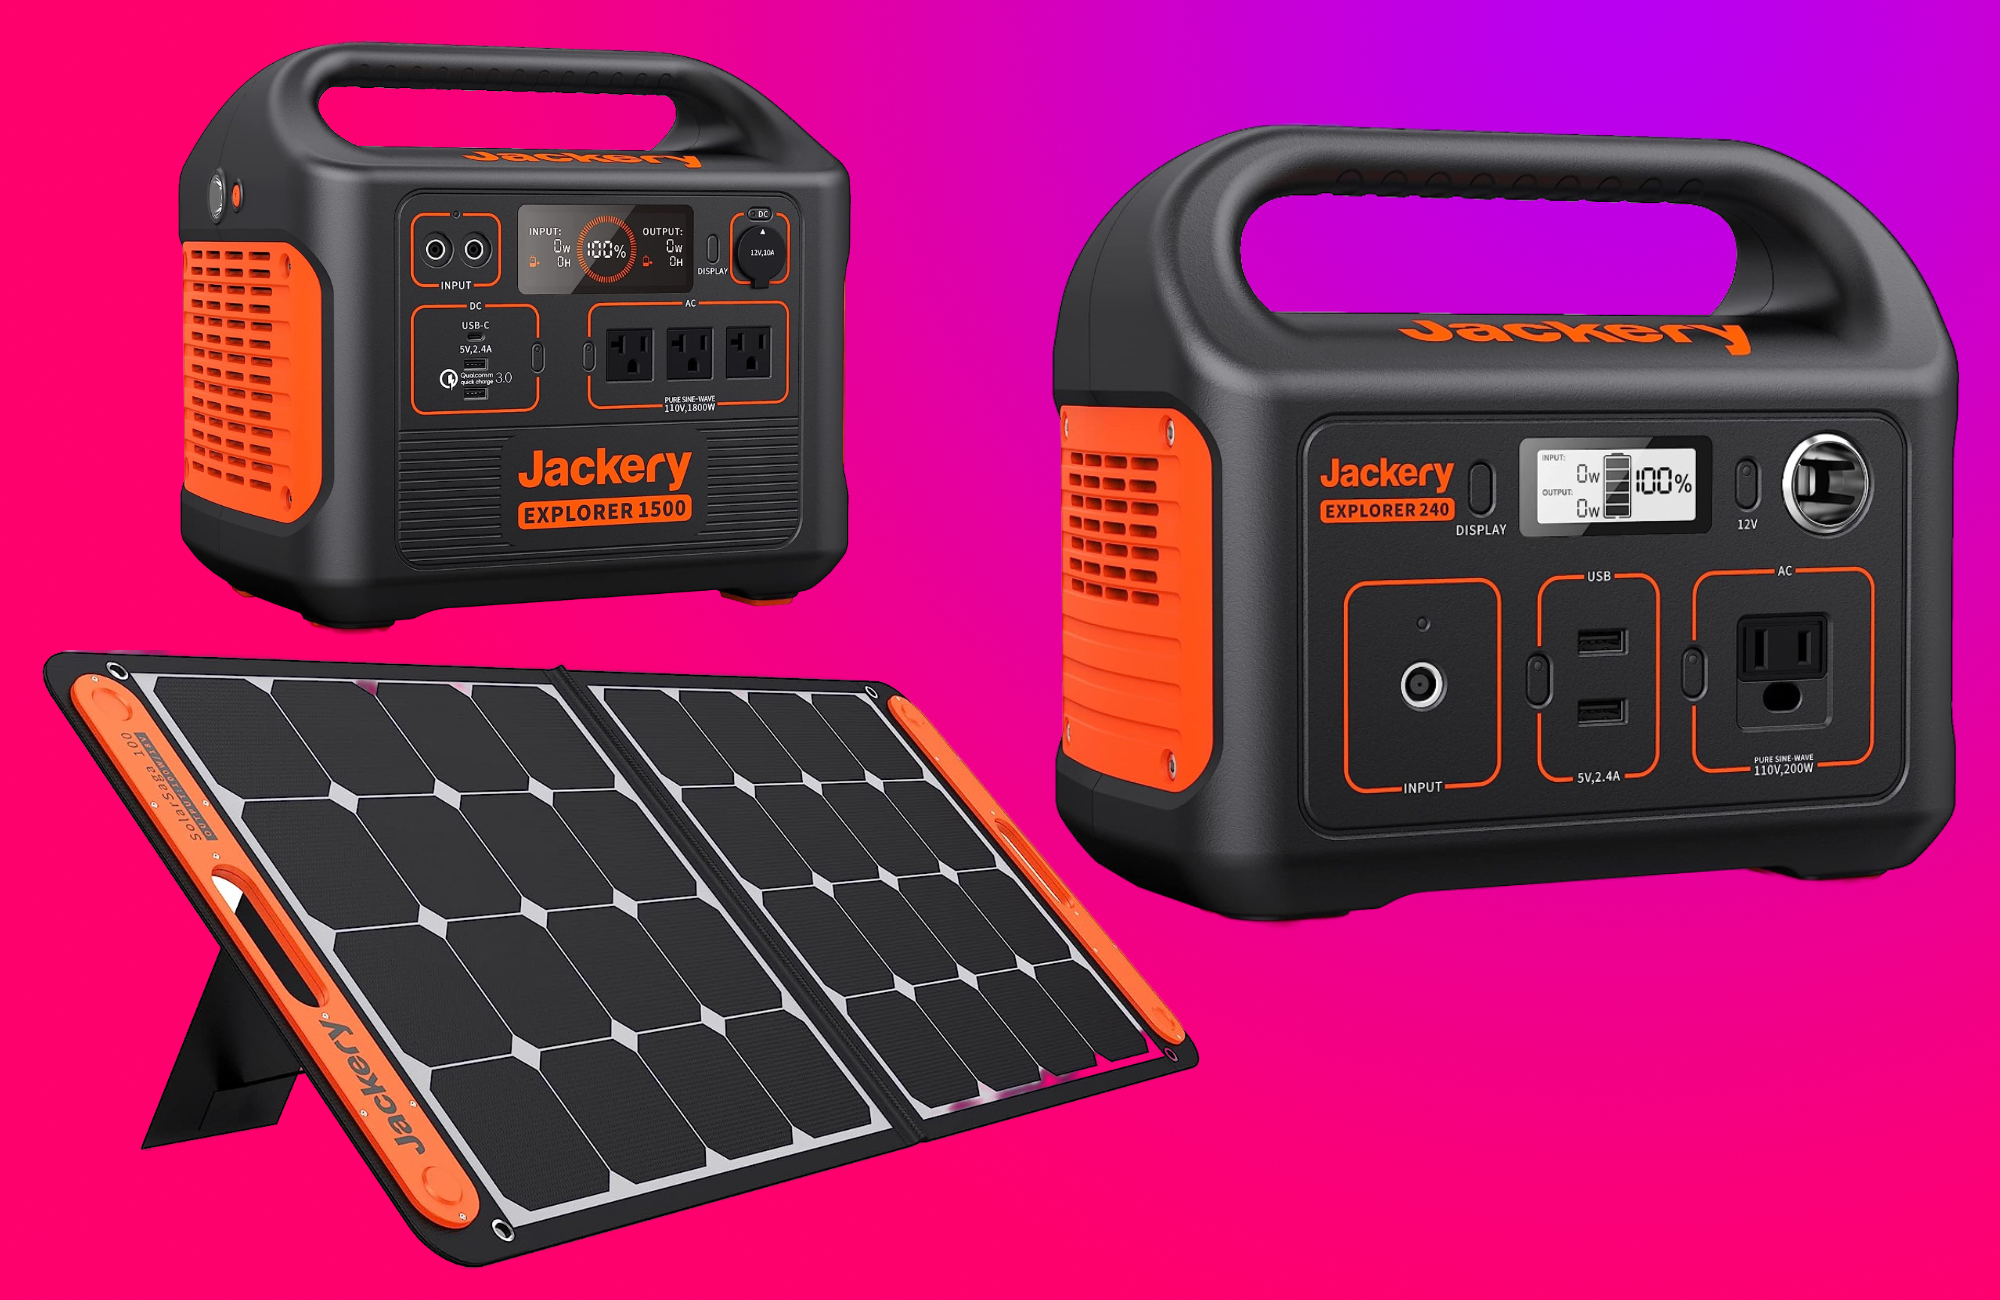 Prime Day chops up to $1,000 off Jackery solar generators